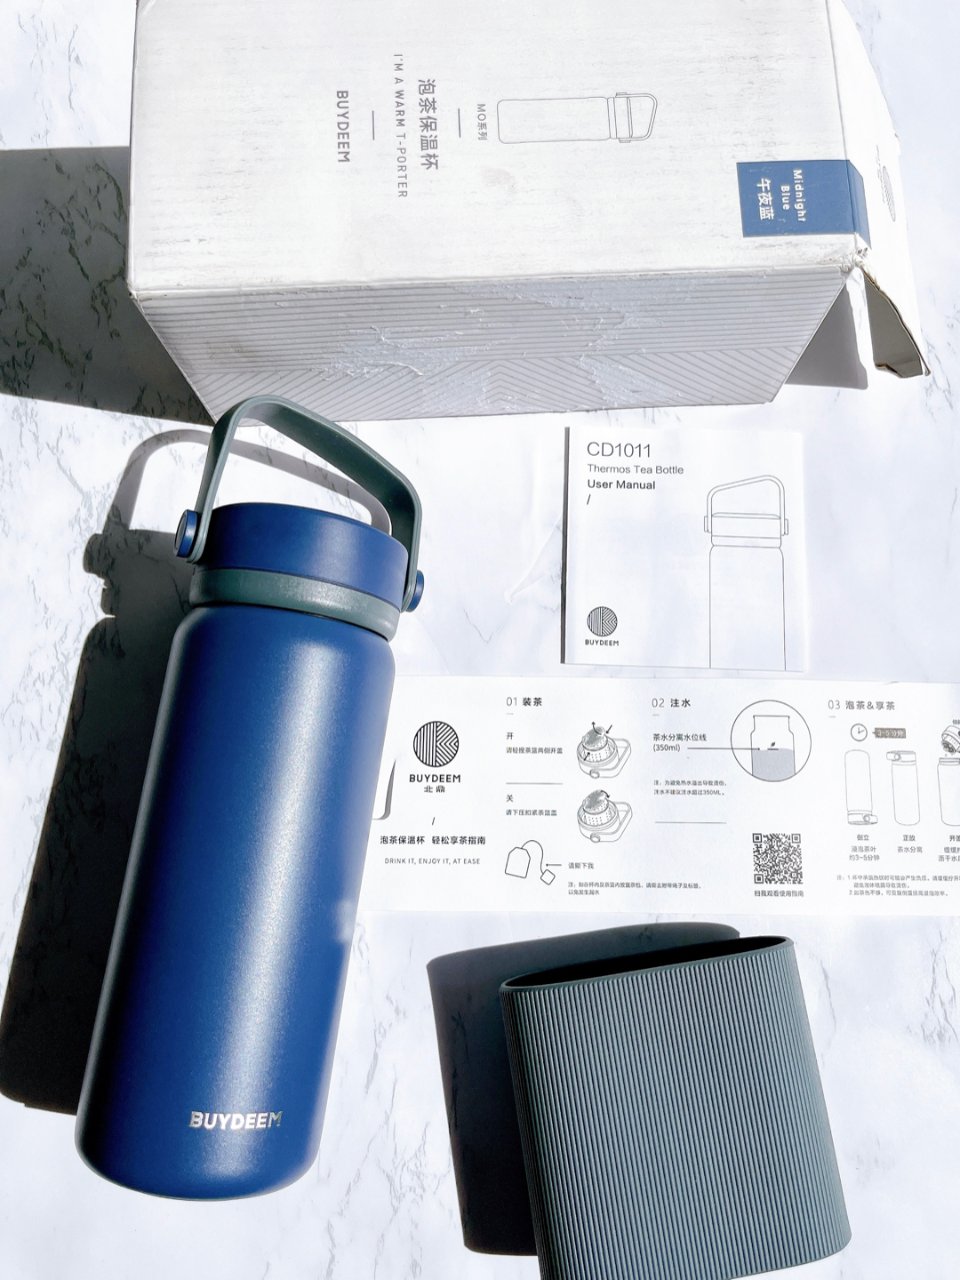 Buydeem 北鼎,BUYDEEM CD1011 Stainless Steel Thermos Tea Bottle with Removable Infus